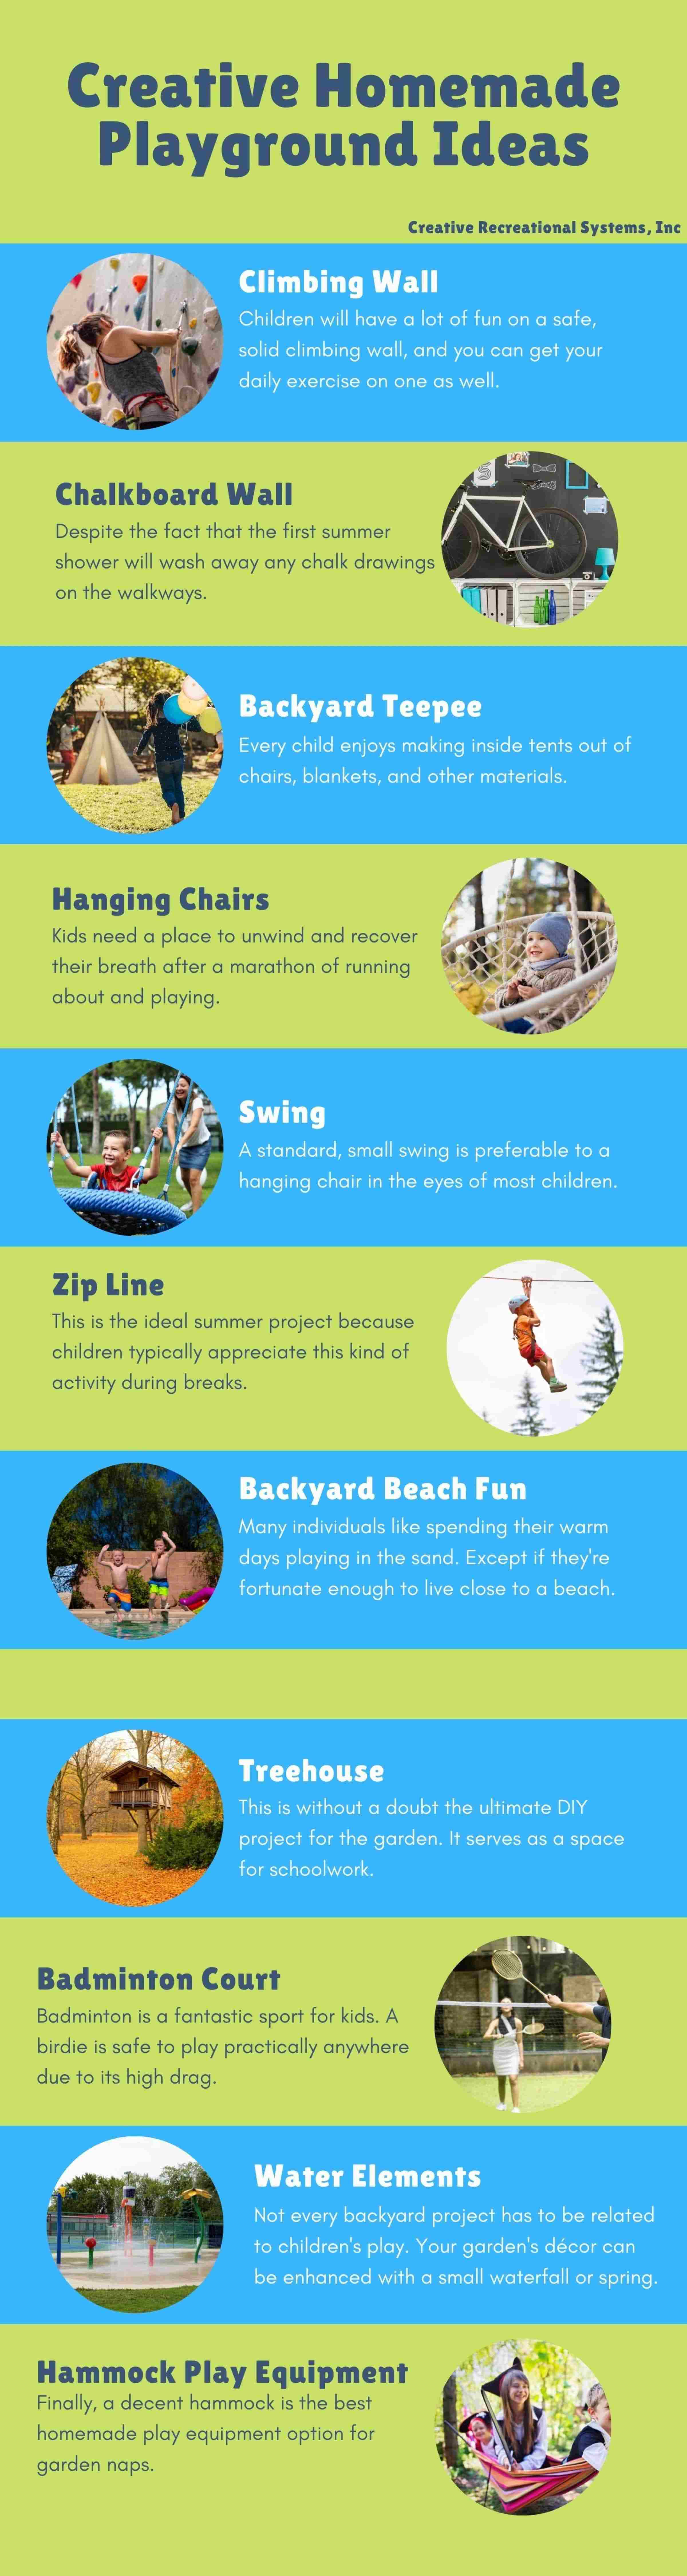 Weekend-Buildable Creative Homemade Playground Ideas